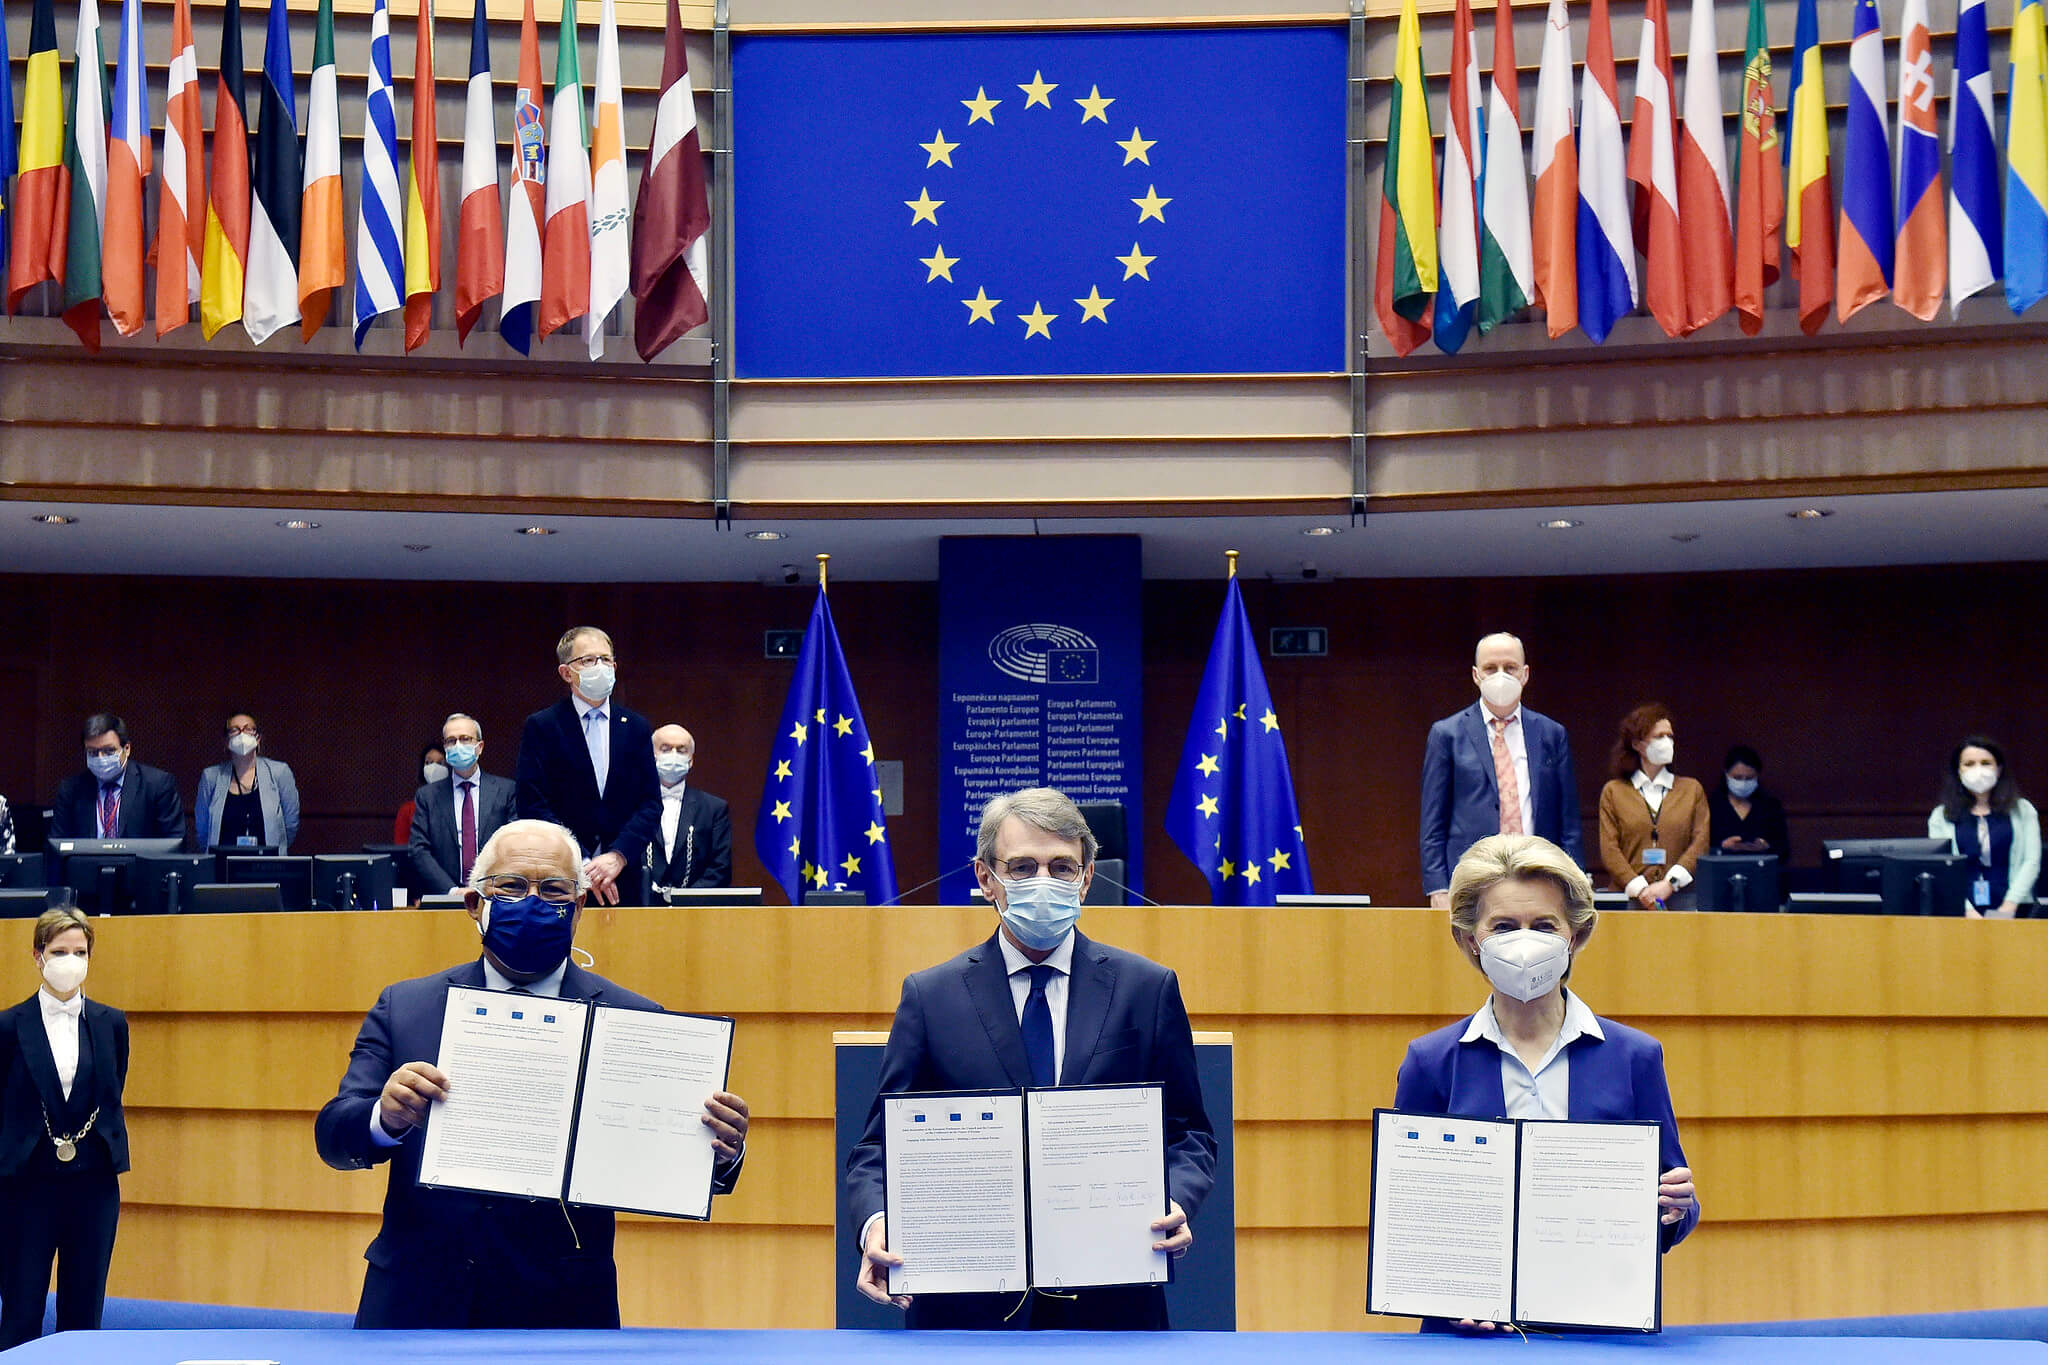 The presidents of the European Parliament, Commission and Council of the EU signed a joint declaration on the Conference on the Future of Europe.